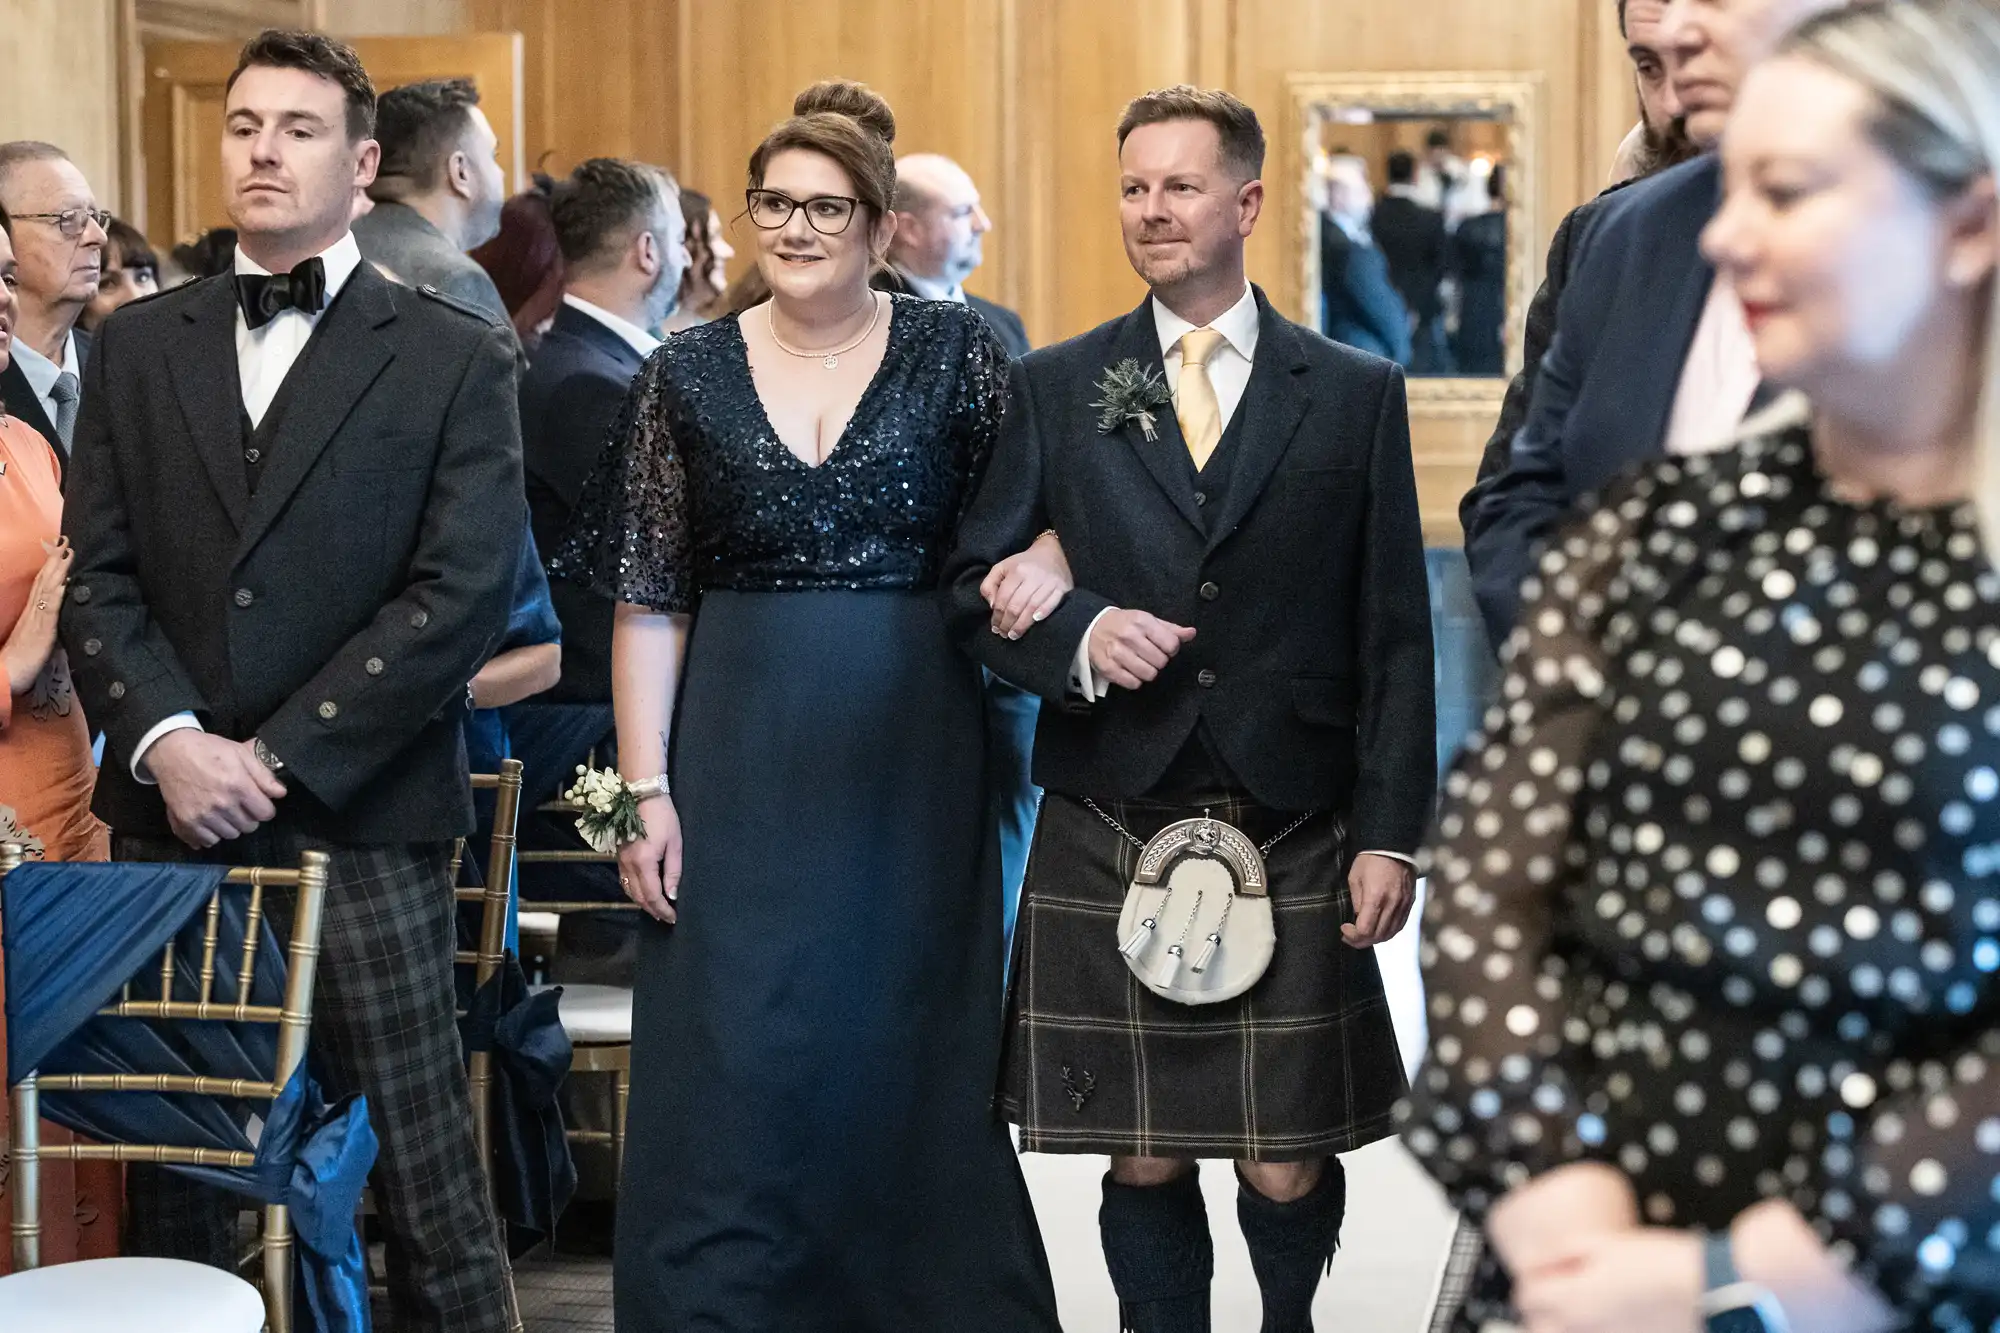 A man and woman, formally dressed, walk arm in arm down an aisle. The man wears a traditional Scottish kilt and sporran, while the woman wears a dark dress with sparkly details. Others look on in the background.